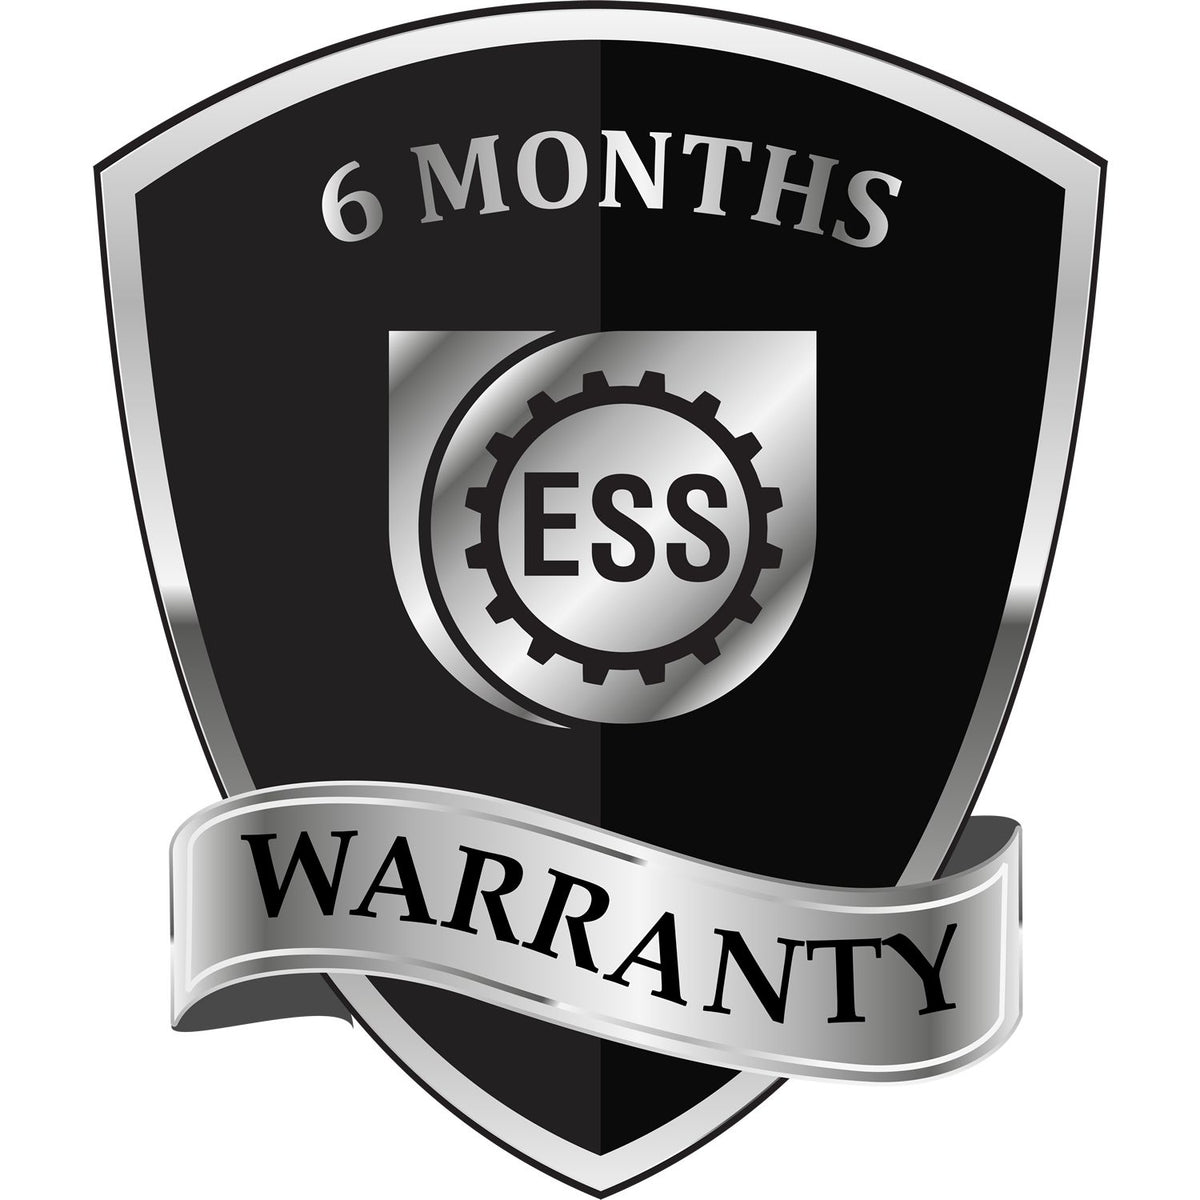 A badge or emblem showing a warranty icon for the Heavy-Duty Massachusetts Rectangular Notary Stamp